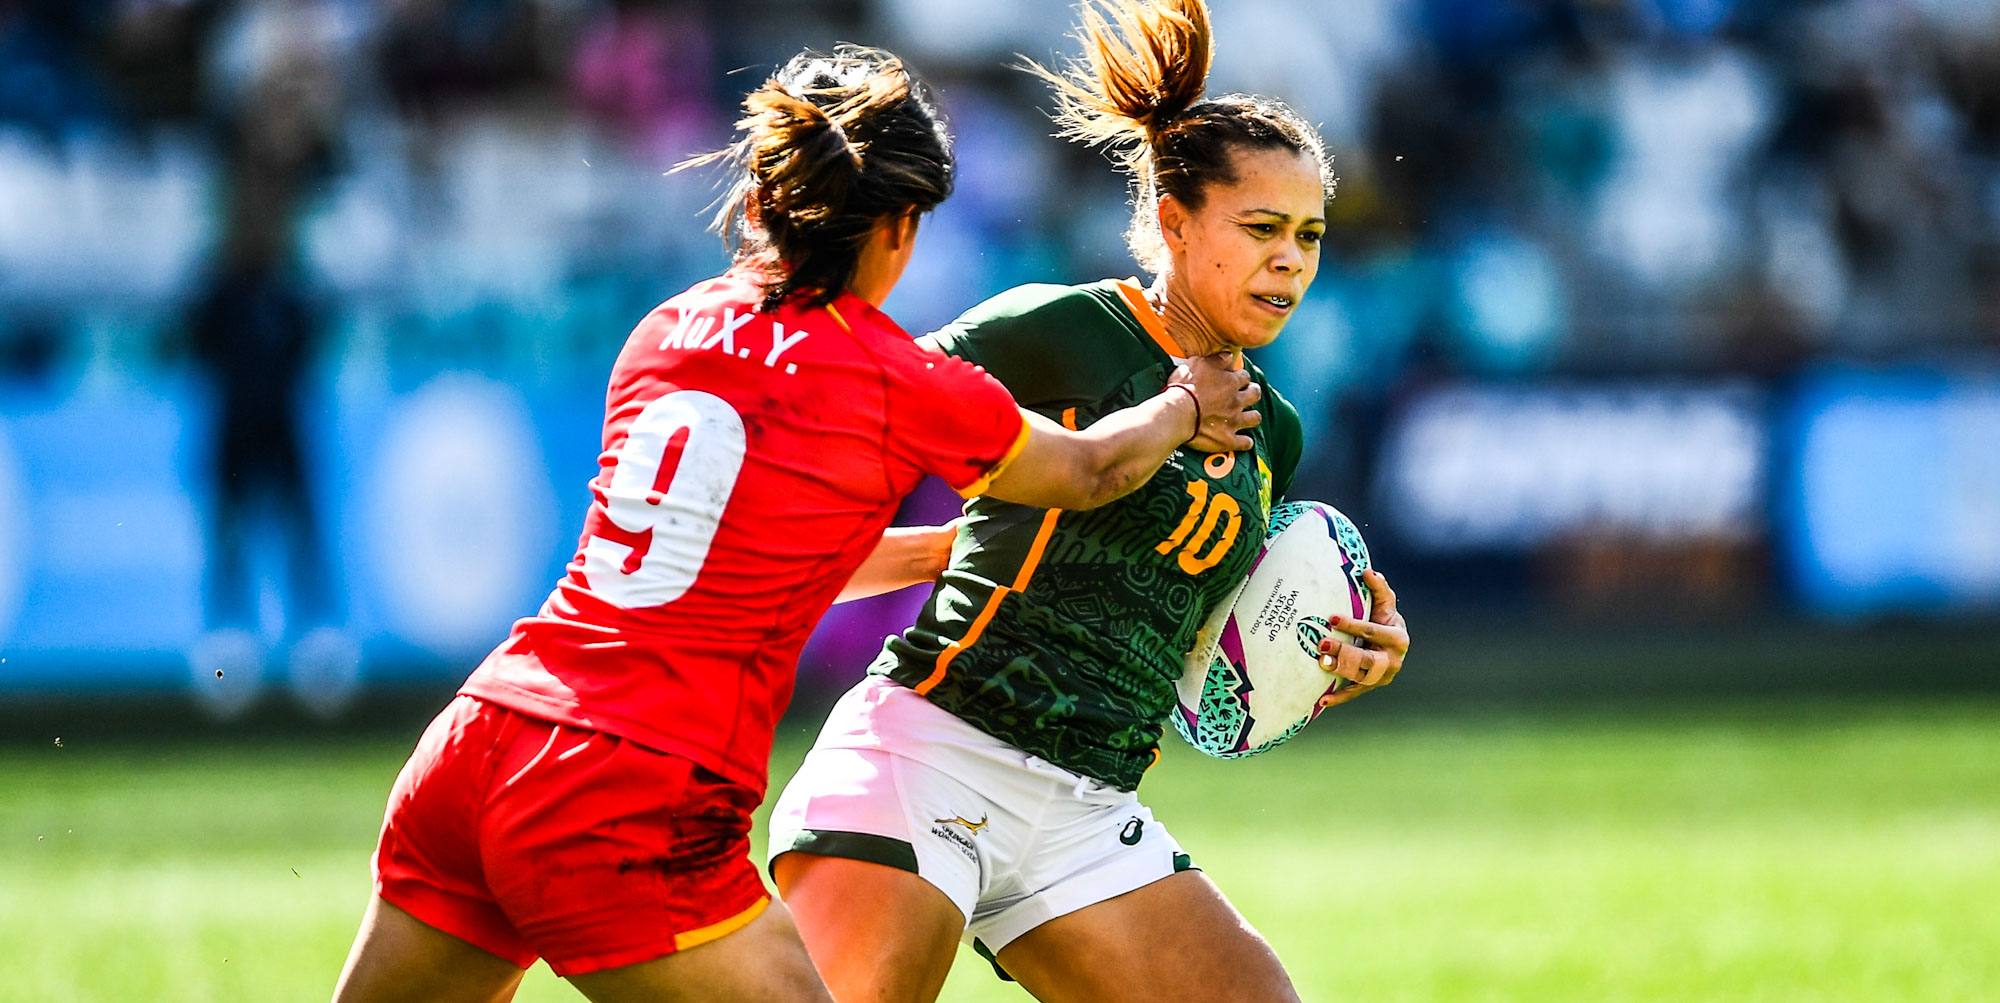 Mathrin Simmers in action at Rugby World Cup Sevens in September.